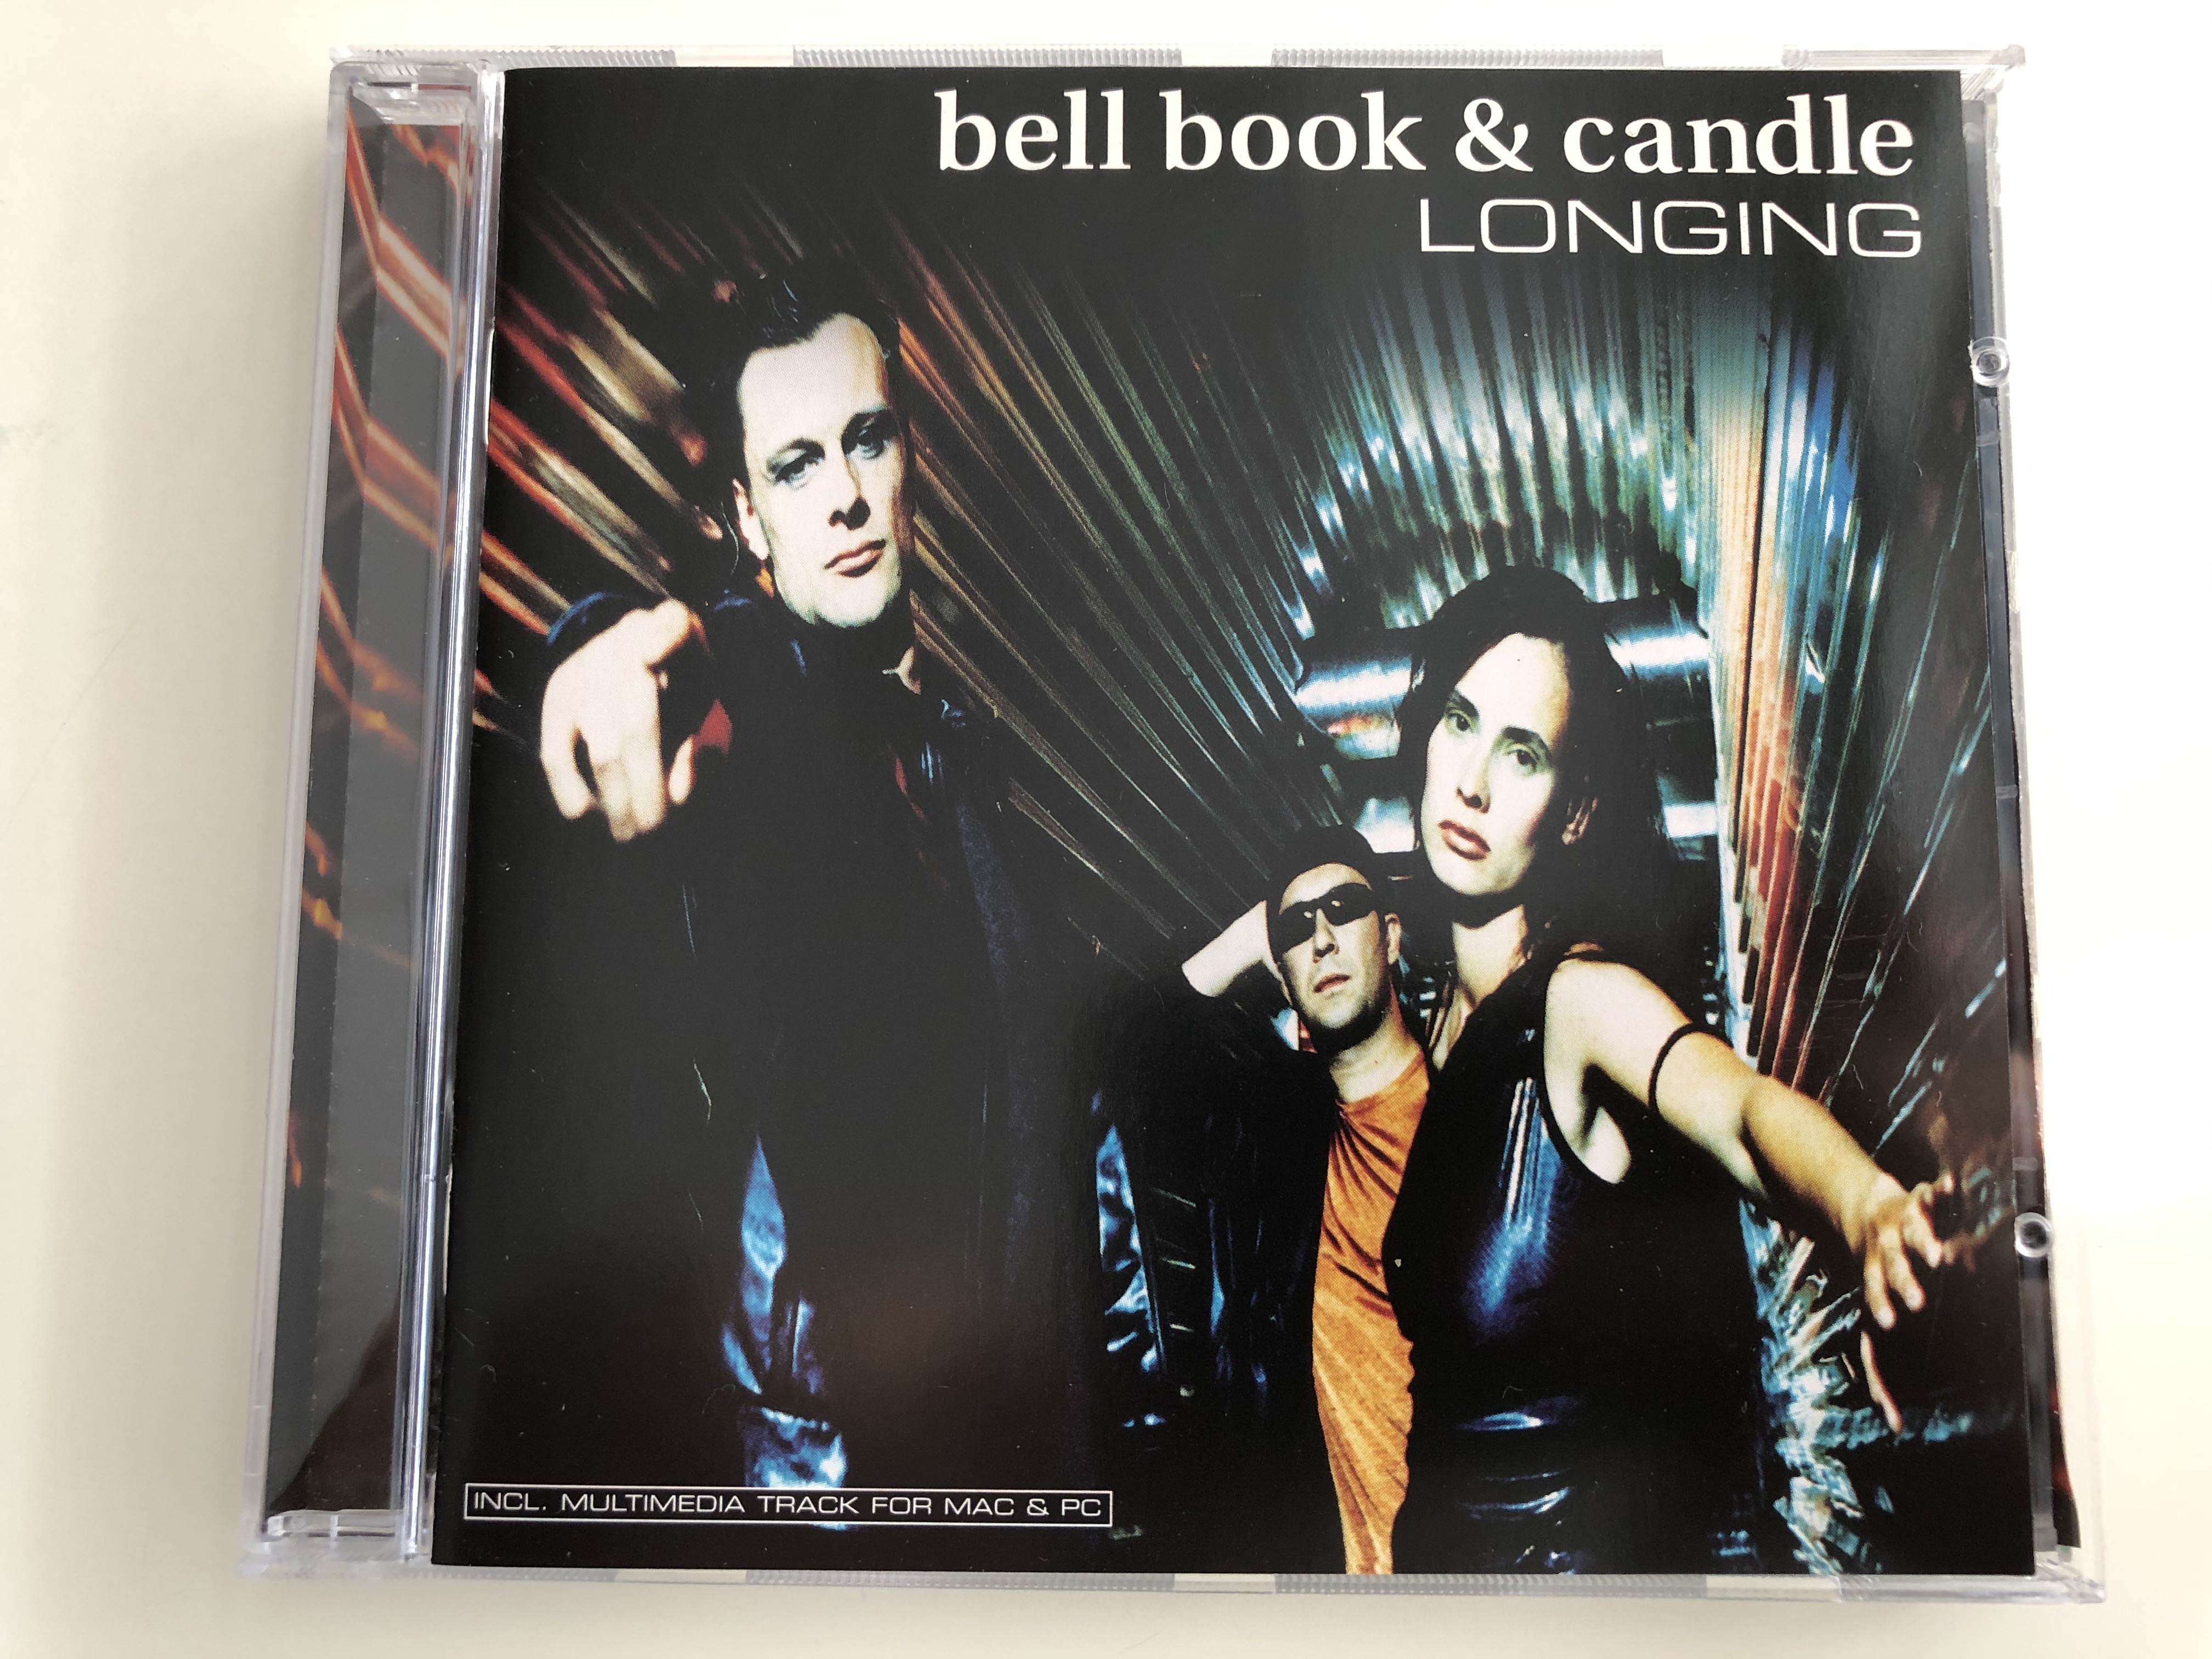 bell-book-candle-longing-incl.-multimedia-track-for-mac-pc-bmg-berlin-musik-gmbh-audio-cd-1999-74321-68514-2-1-.jpg